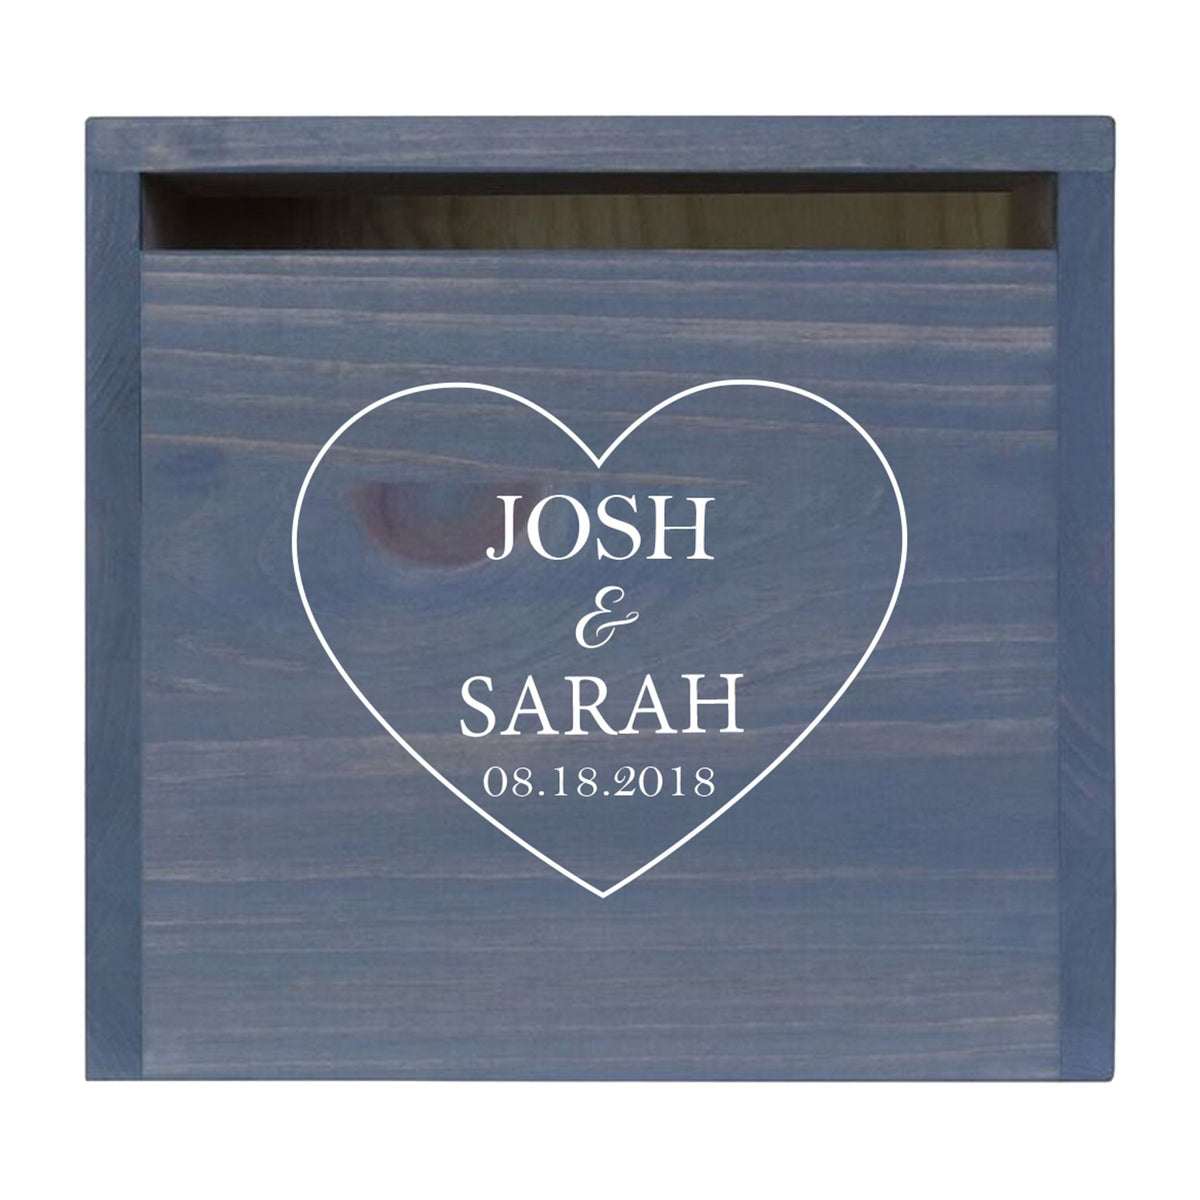 Personalized Wooden Card Box for Wedding Ceremonies, Venues, Receptions, Bridal Showers, and Engagement Parties 13.5x12 - Josh &amp; Sarah (Heart) - LifeSong Milestones